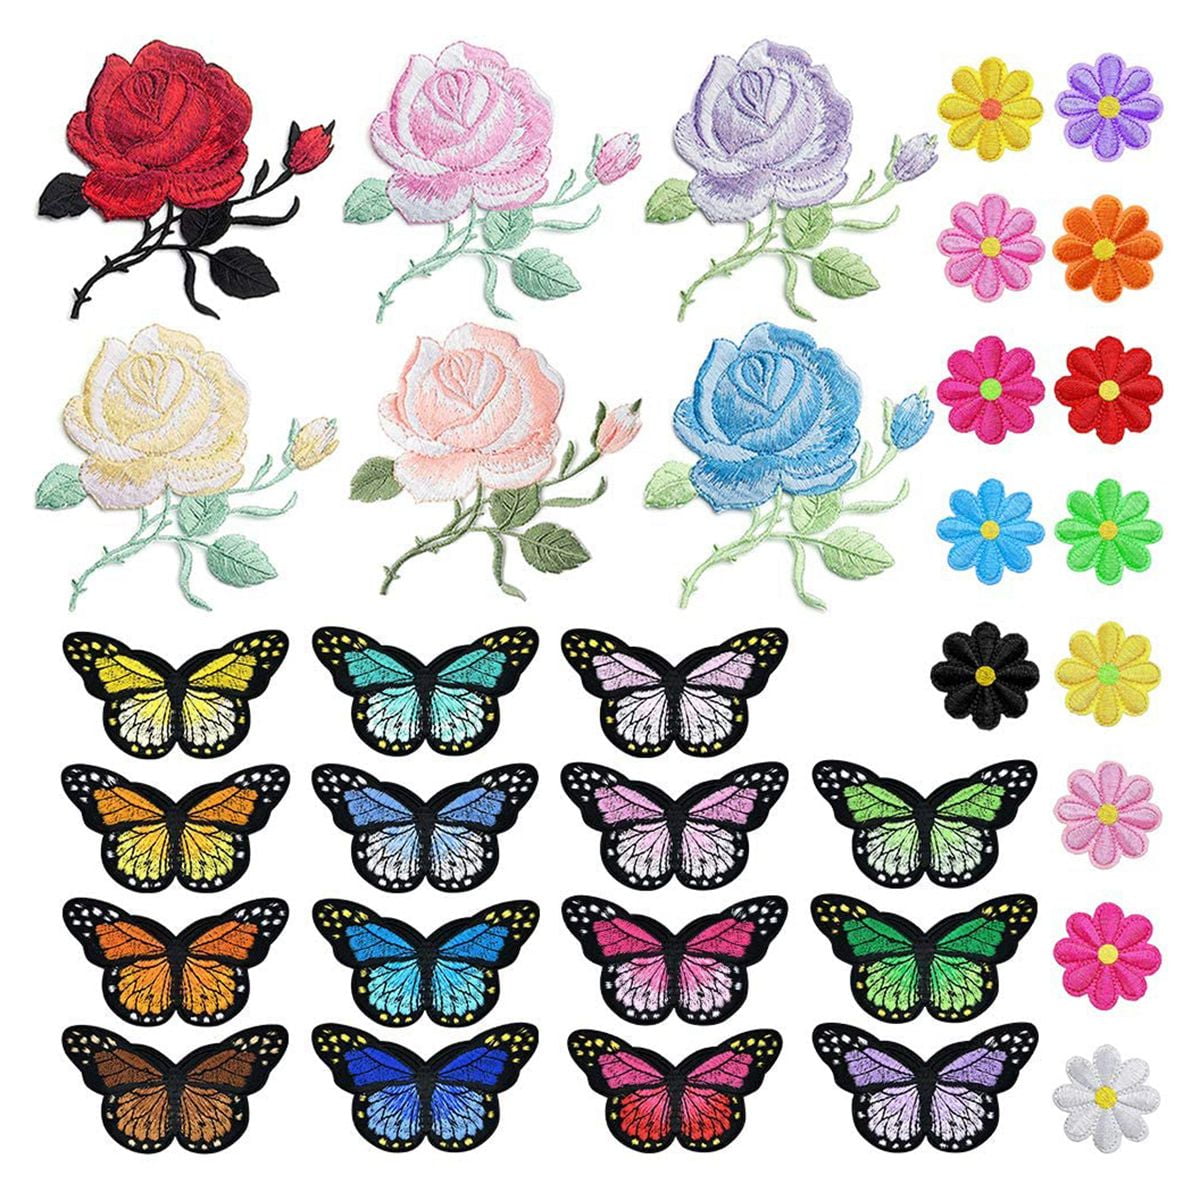 Shiny Pink Butterfly Applique Motifs For Craft Pack Of 6 